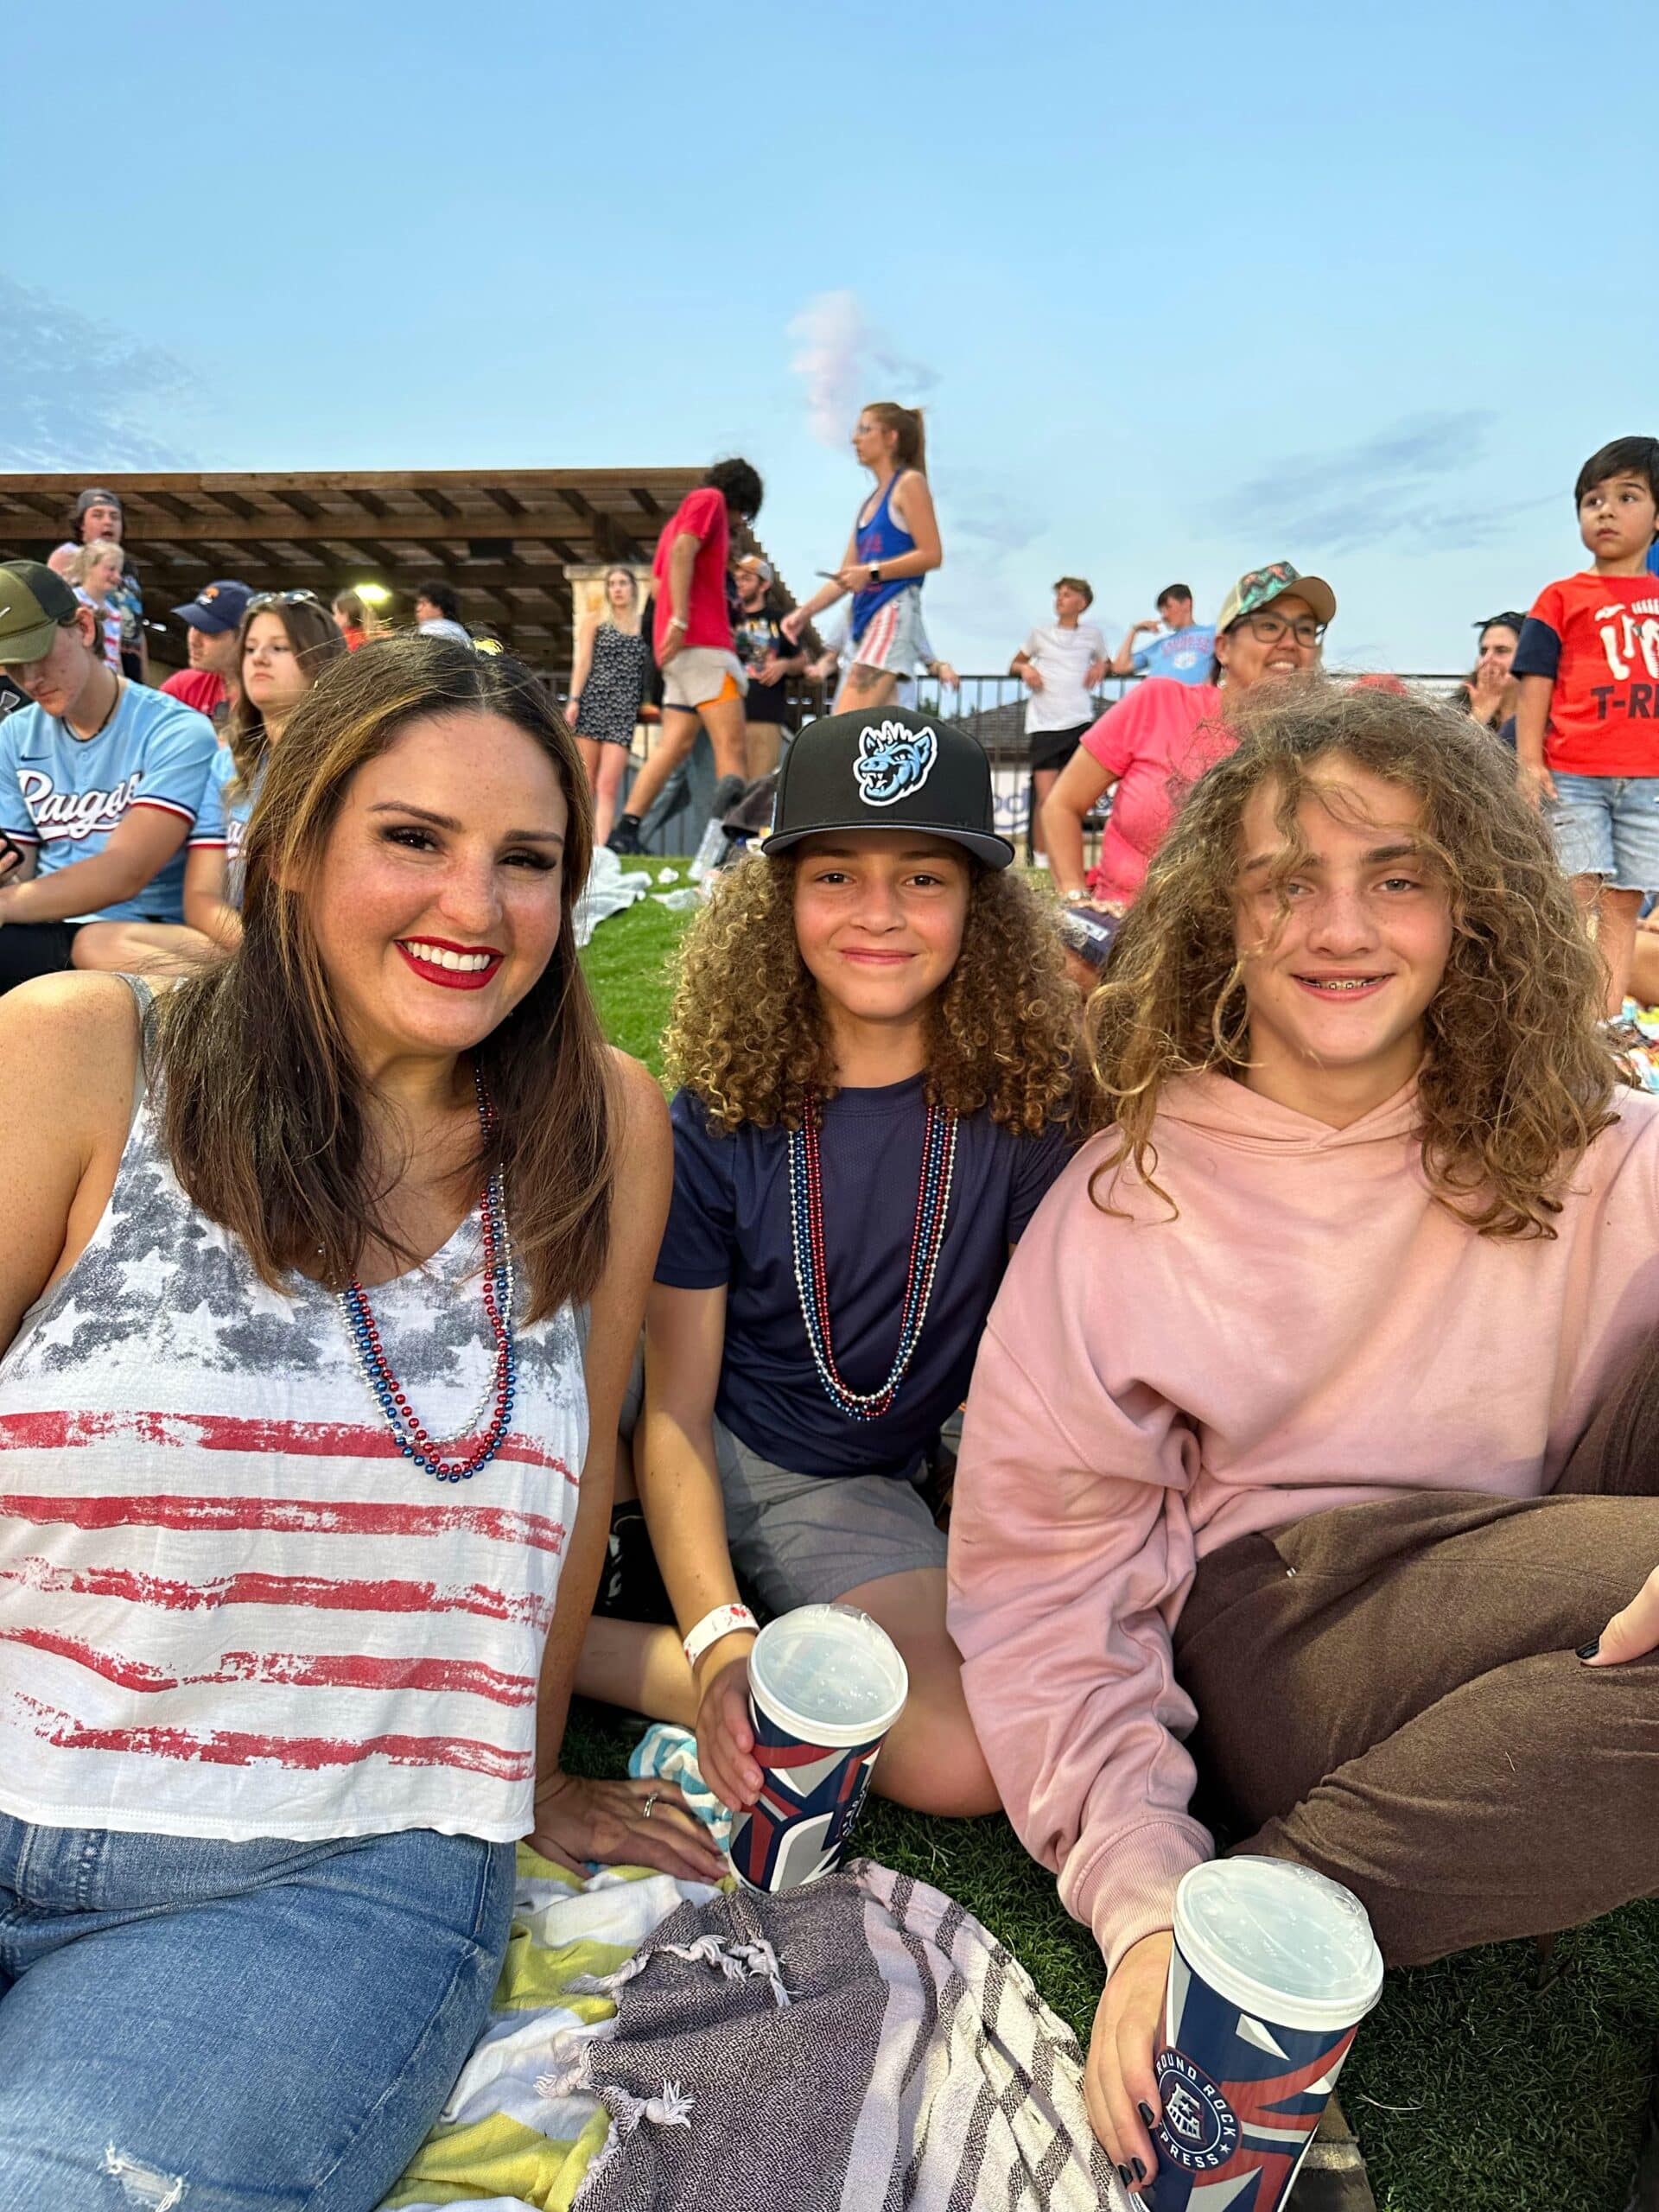 Round Rock Express baseball game on 4th of July